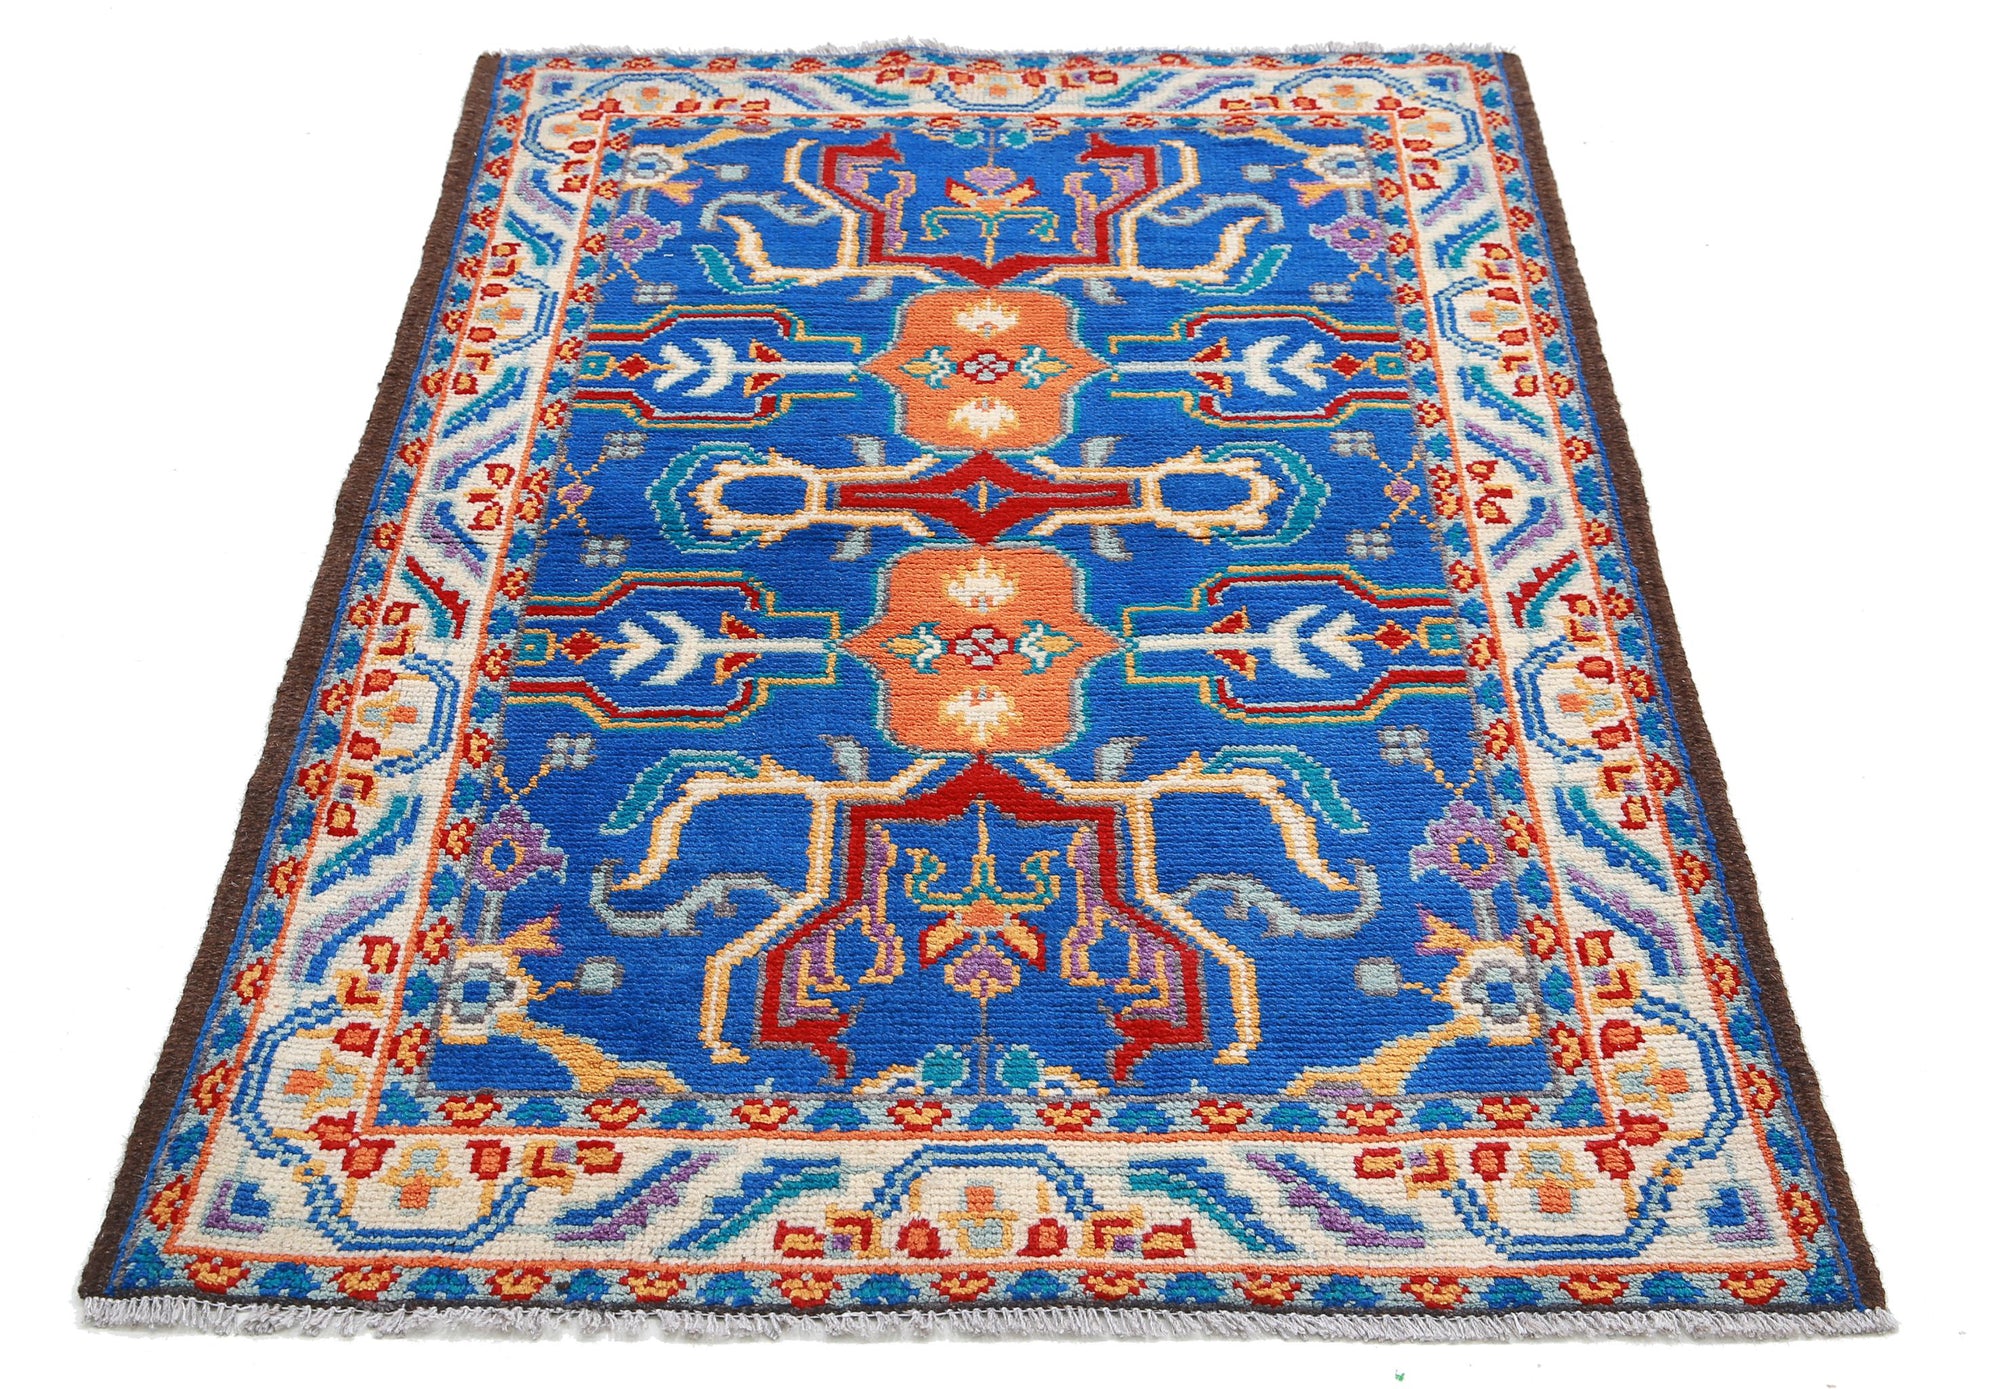 Revival-hand-knotted-qarghani-wool-rug-5014201-3.jpg